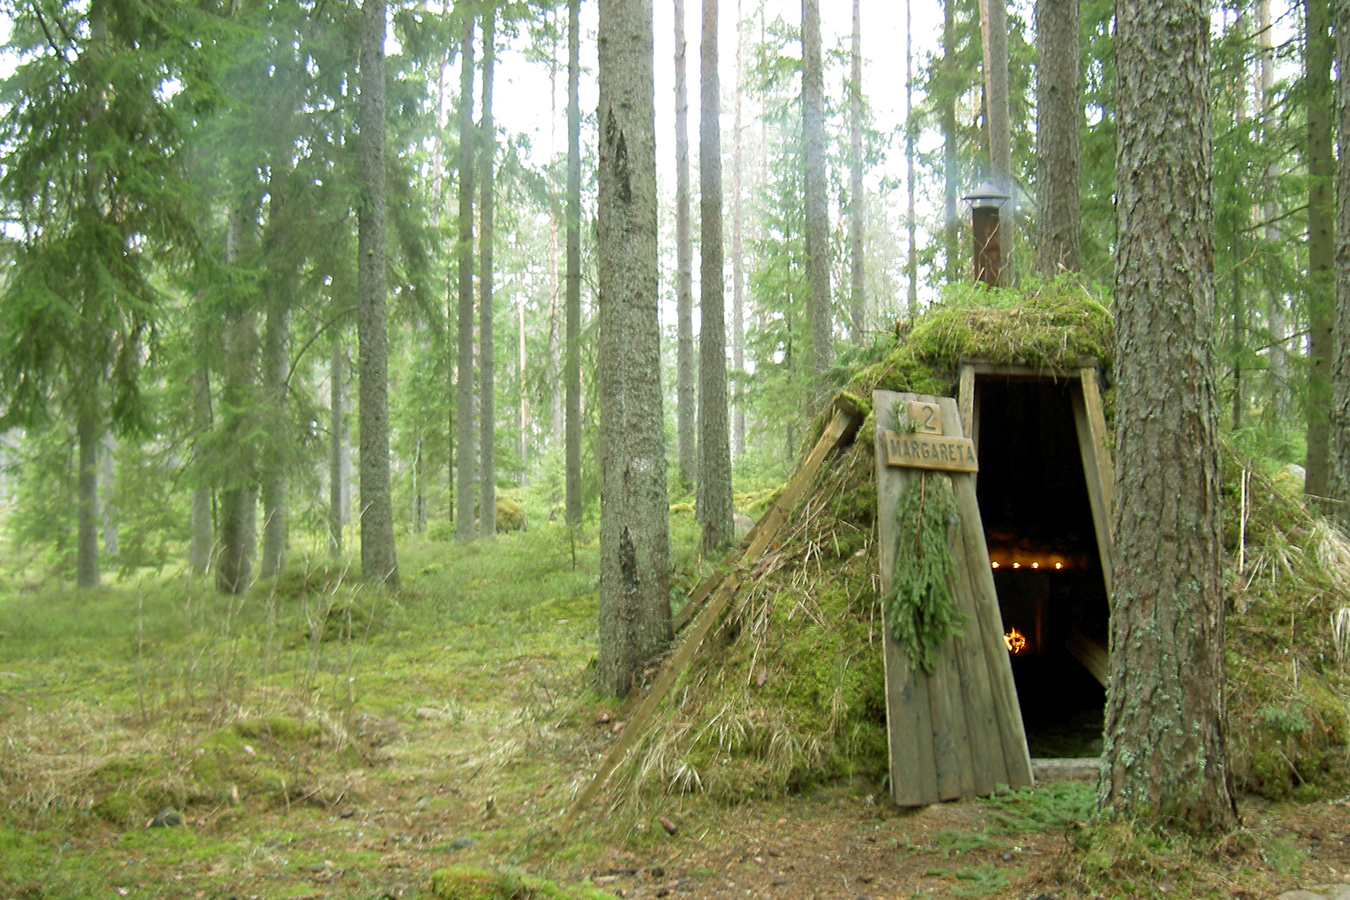 Huts built into the earth at ‘Sweden’s most primitive hotel’, Kolarbyn